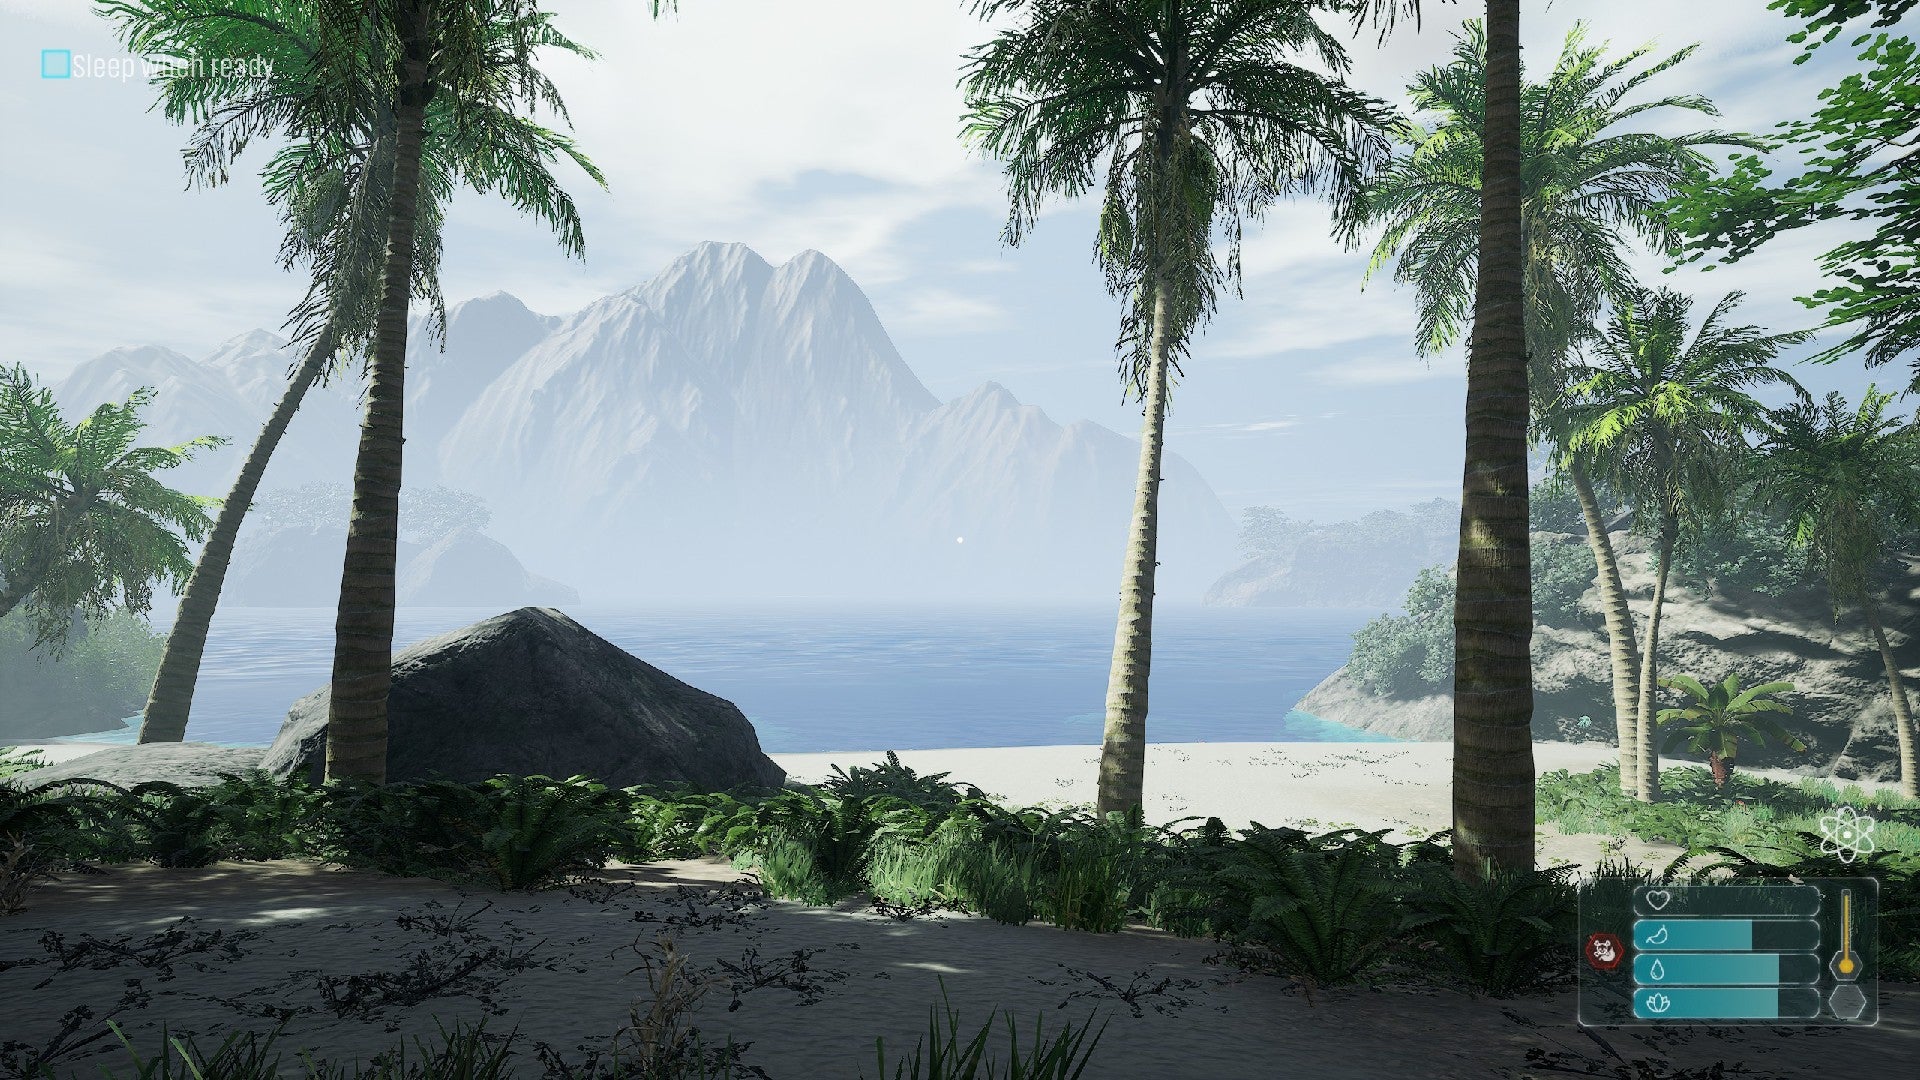 Retreat to Enen screenshot showing palm trees along the beach, which stretches out towards a blue lagoon